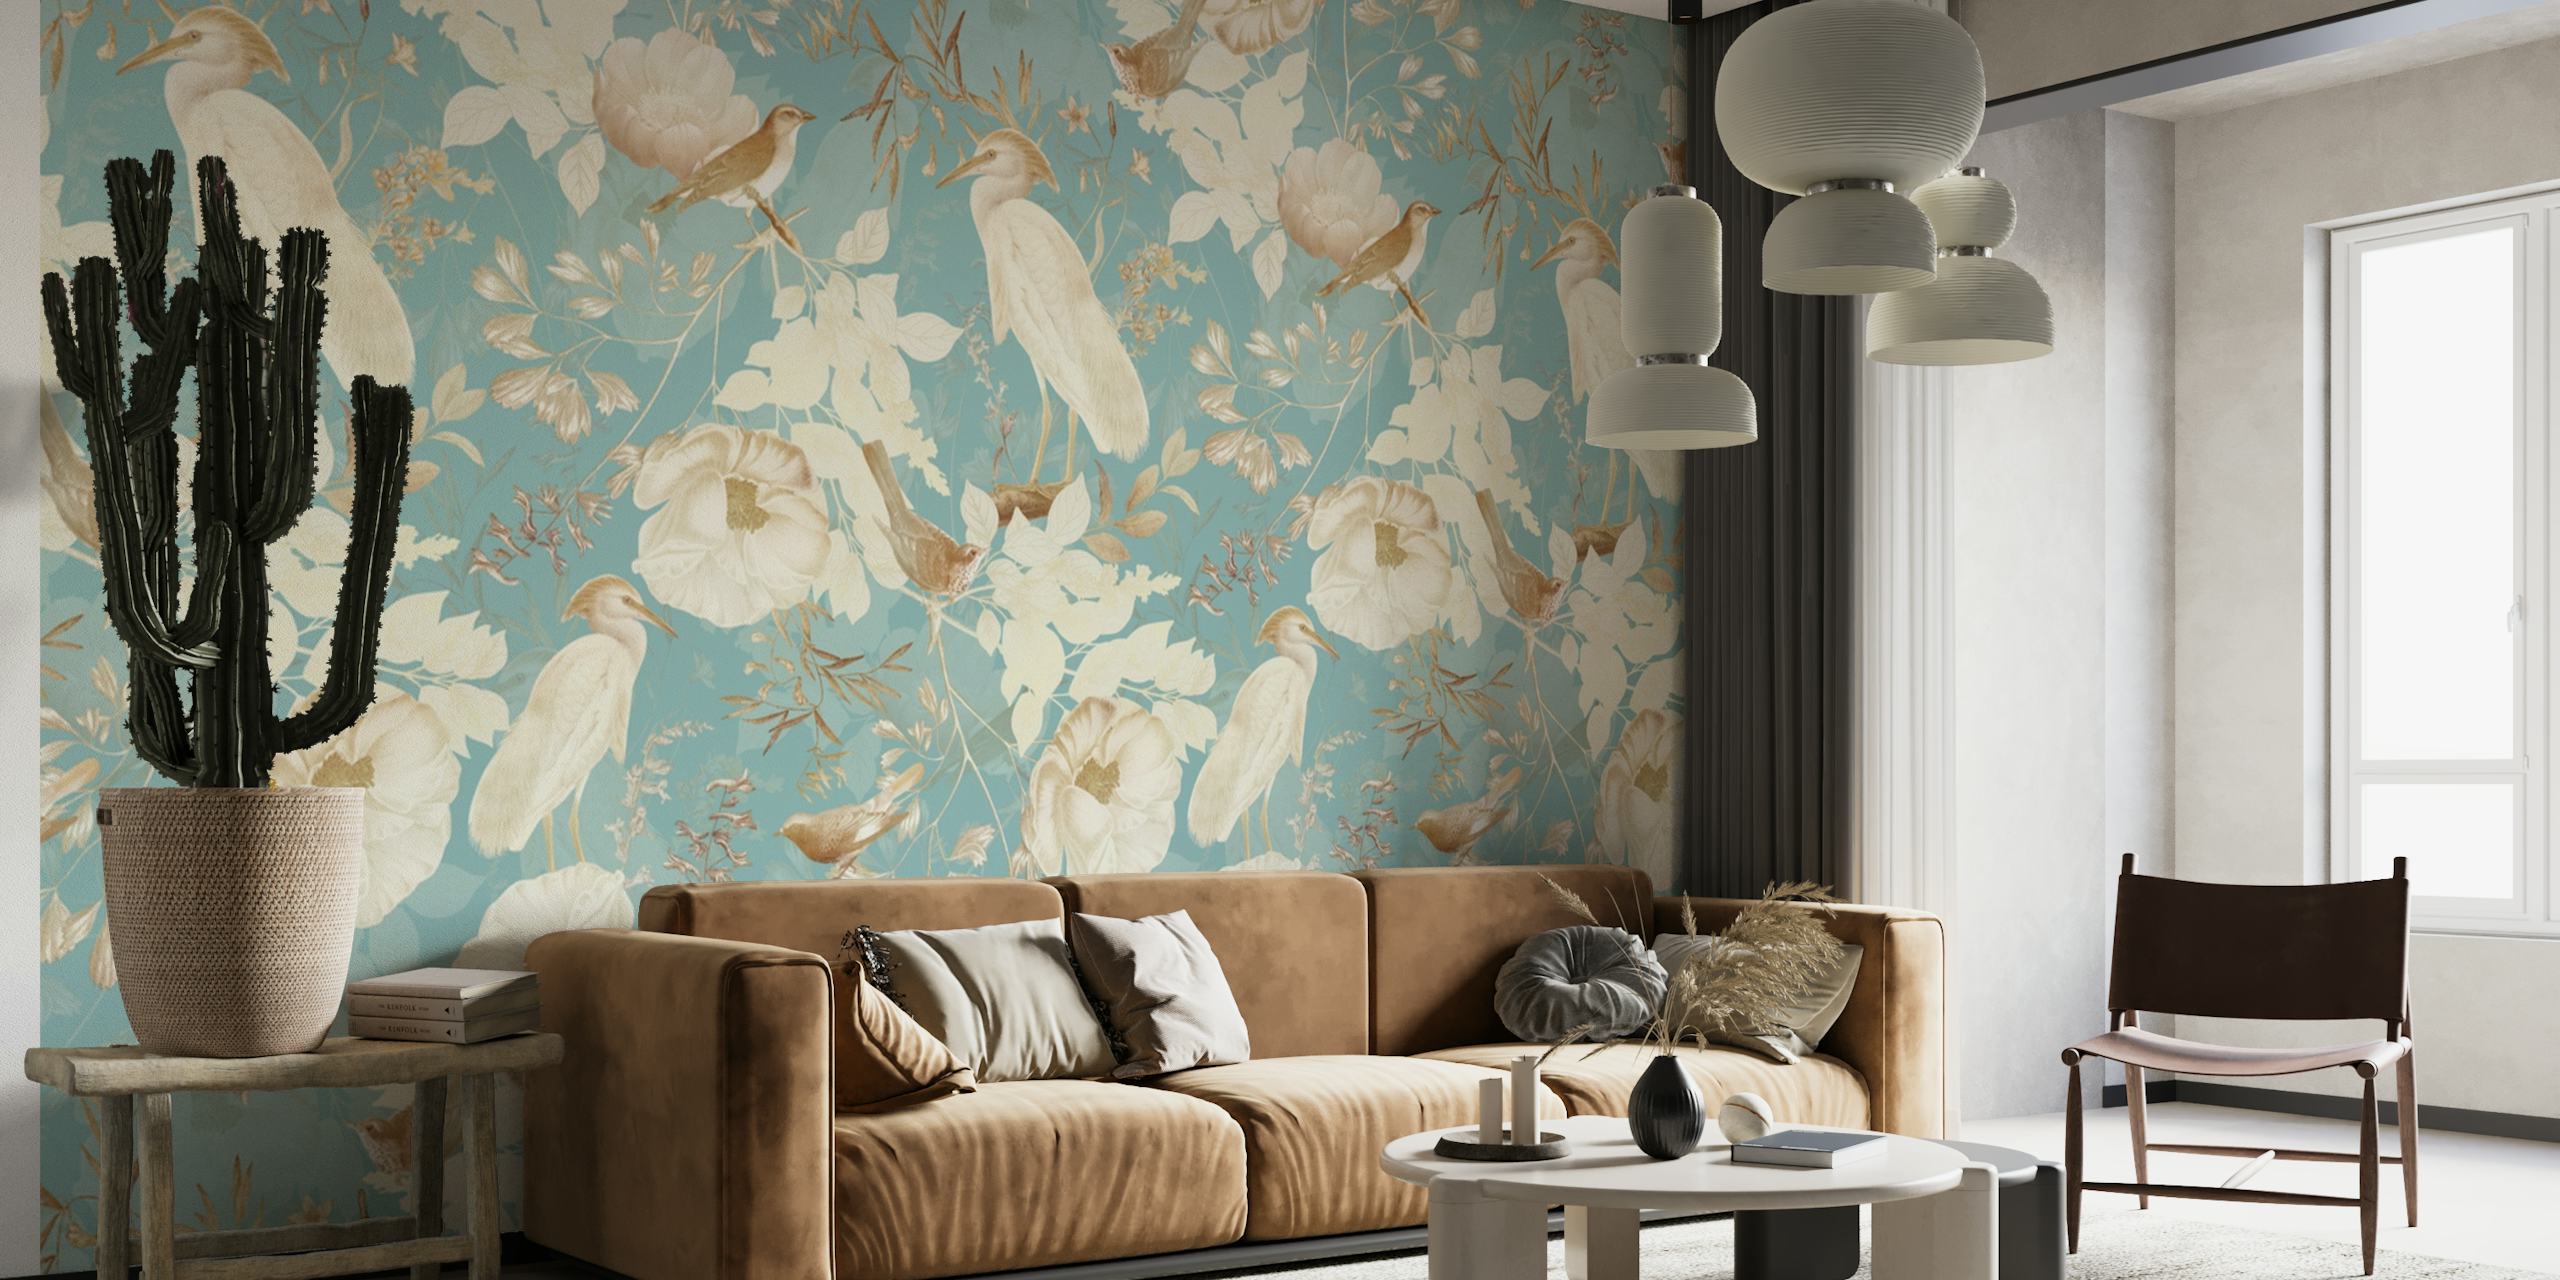 Vintage-style wall mural with exotic birds and floral blossoms in pastel colors